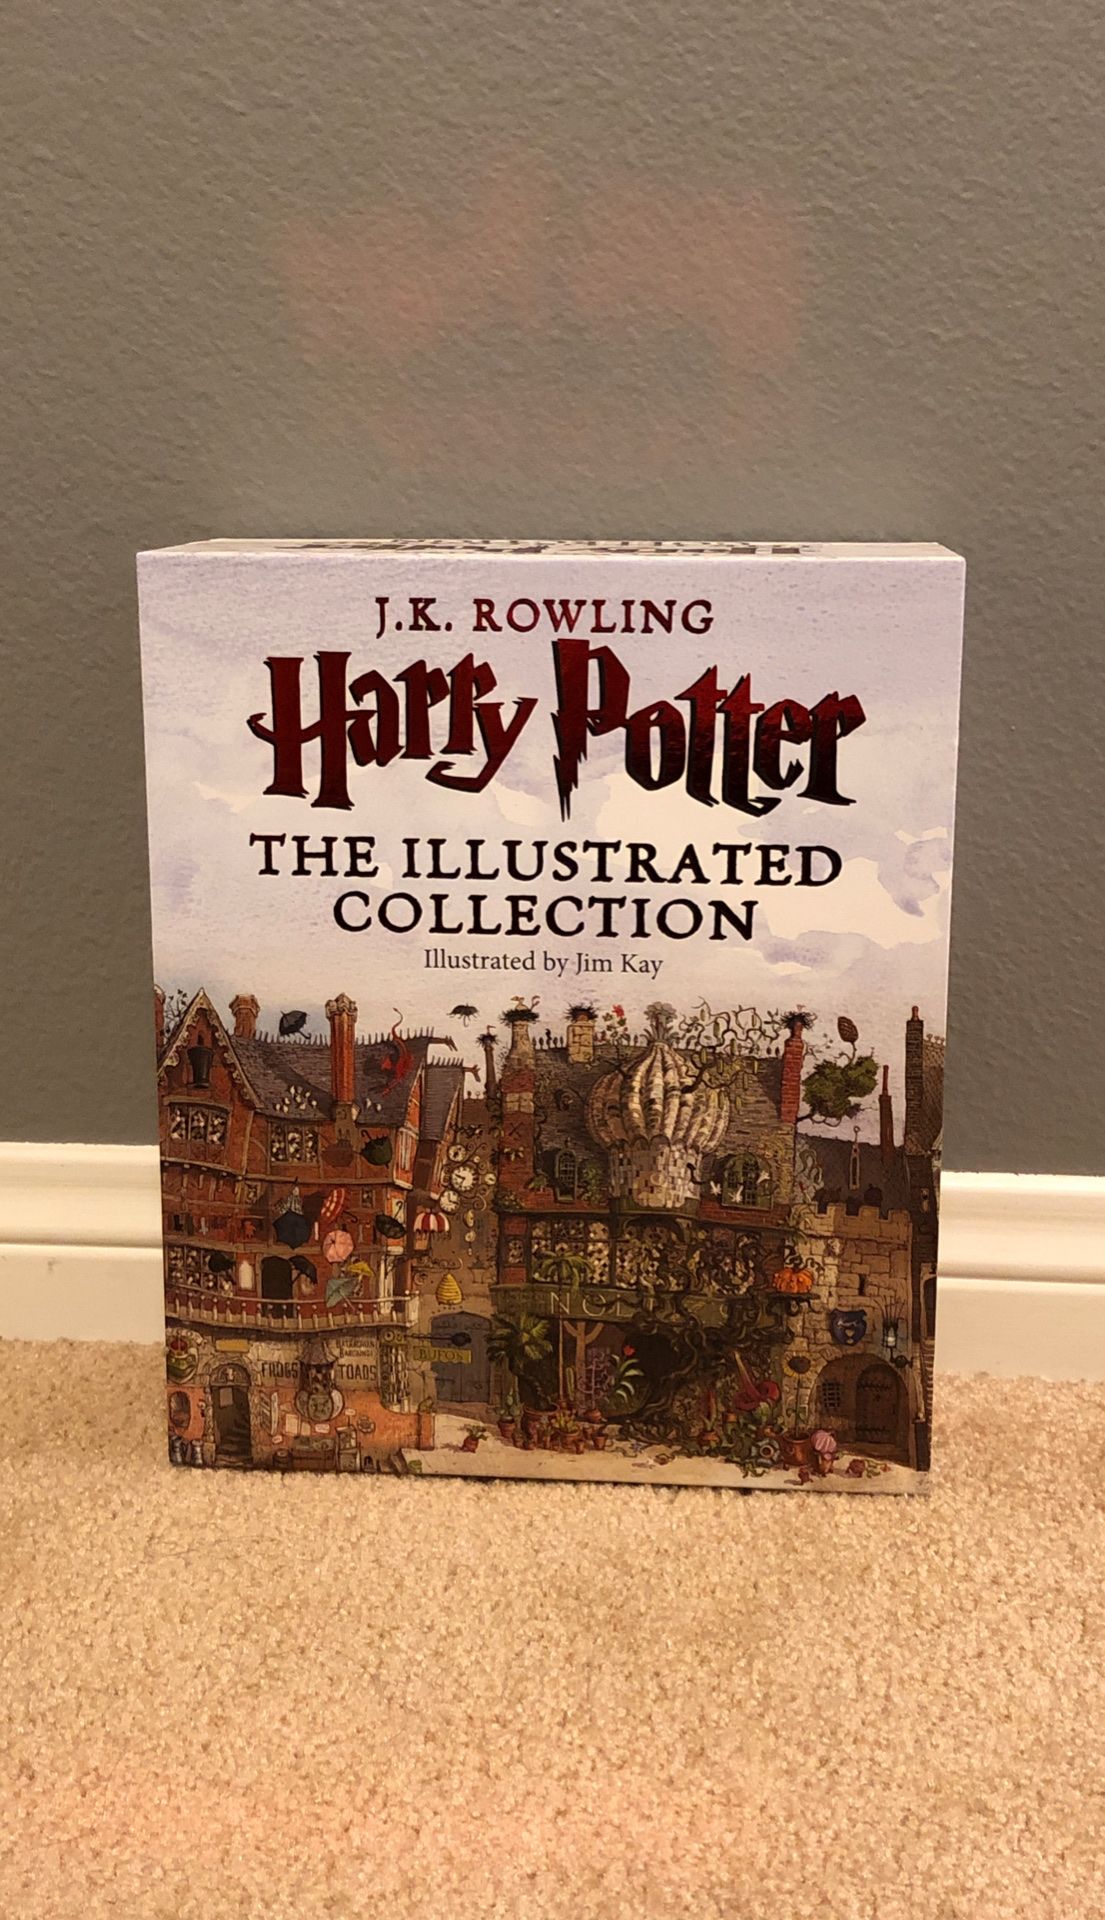 The illustrated books of Harry Potter book series 1-3